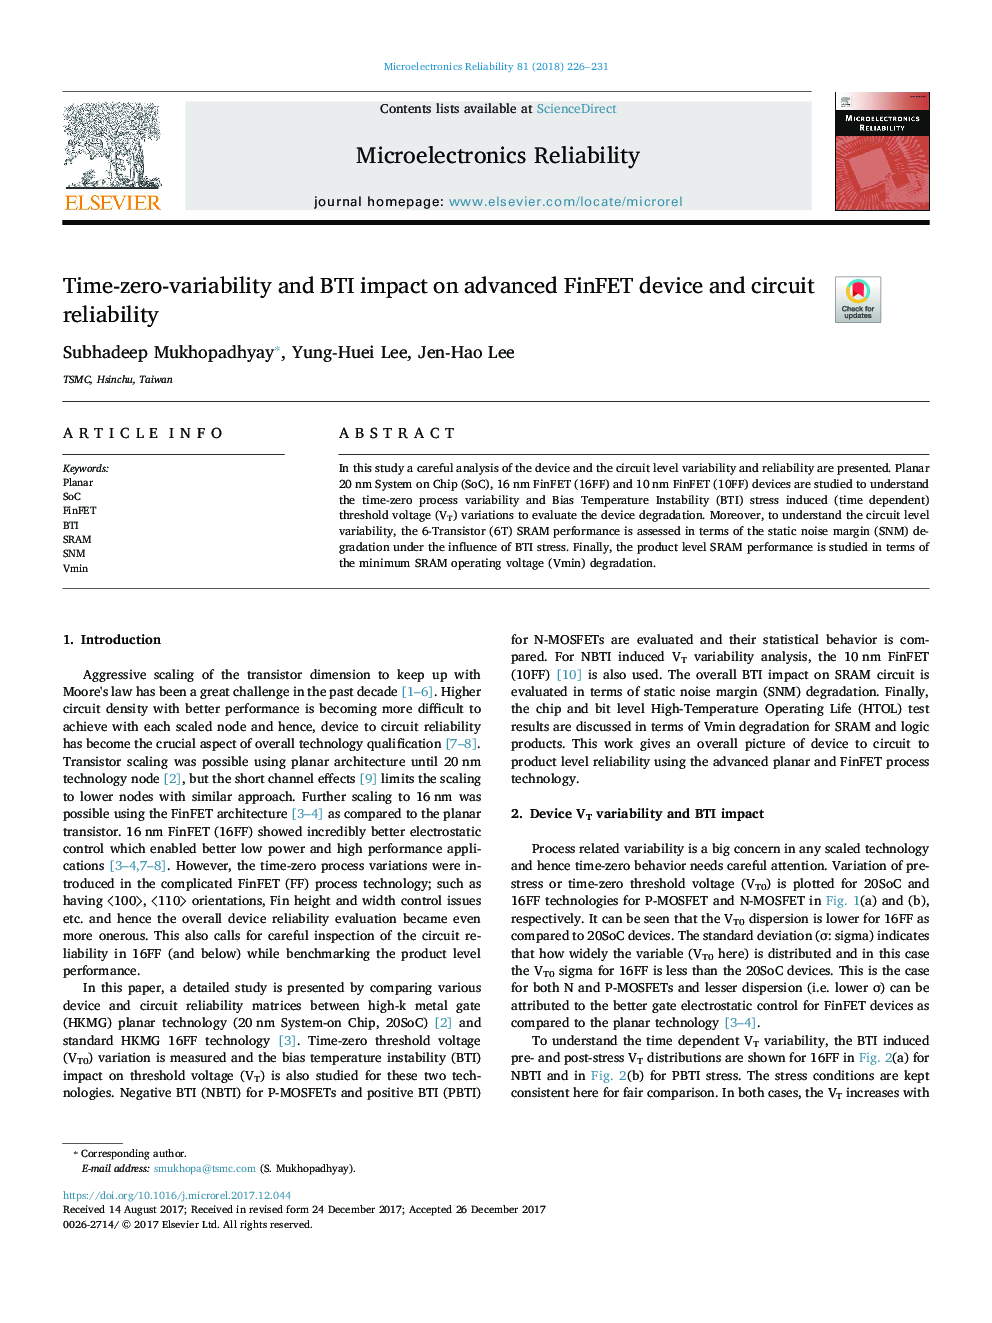 Time-zero-variability and BTI impact on advanced FinFET device and circuit reliability